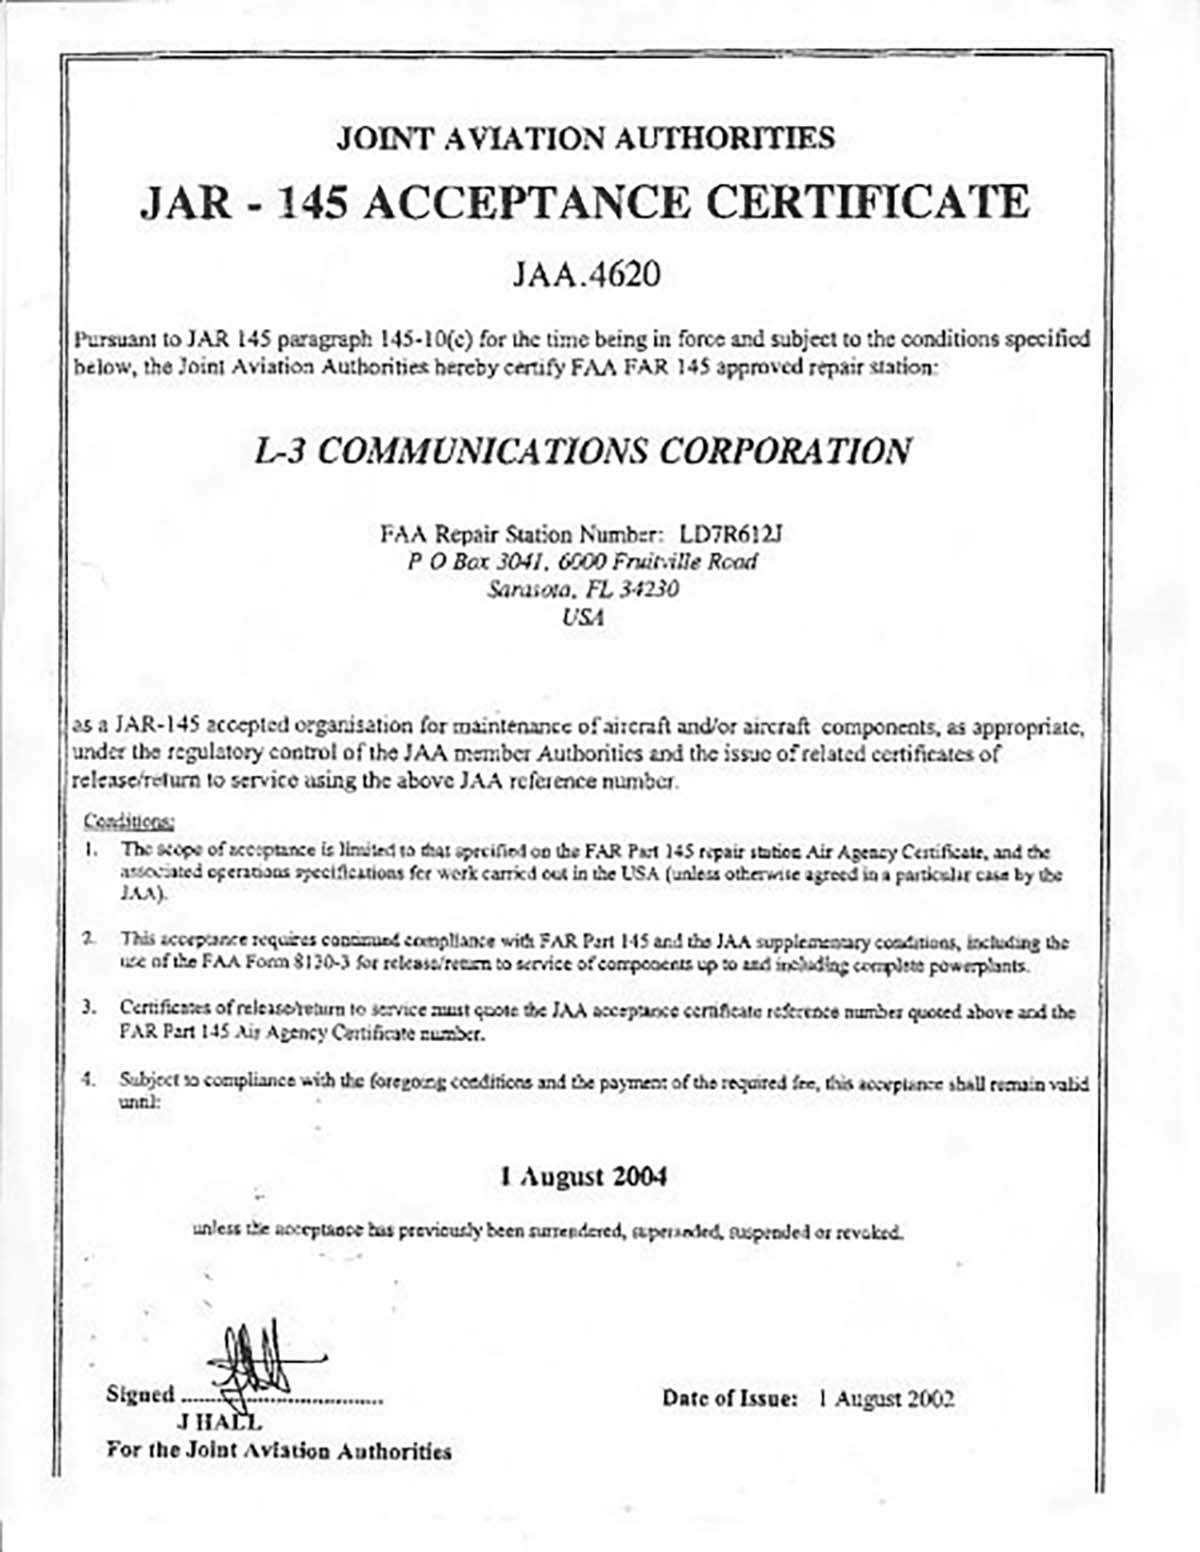 Aircraft Acceptance Certificate